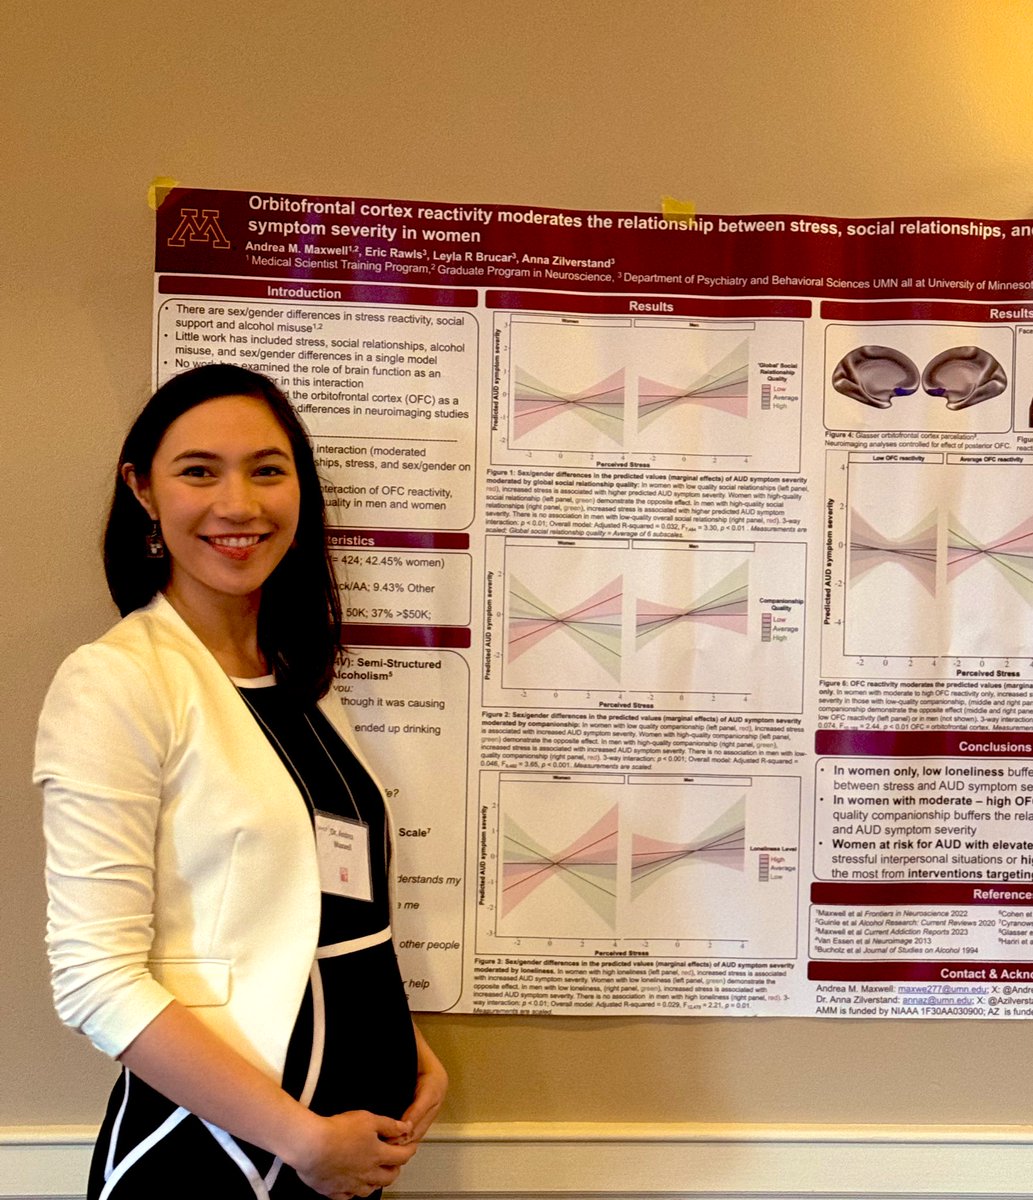 Thanks for the poster award @MNPsychSoc!! I had a great day meeting some of the star psychiatrists in MN. @AZilverstand @UMNMSTP @UMN_Psychiatry @umnmedschool @UMN_MDTA @Repro_psych #academicmom